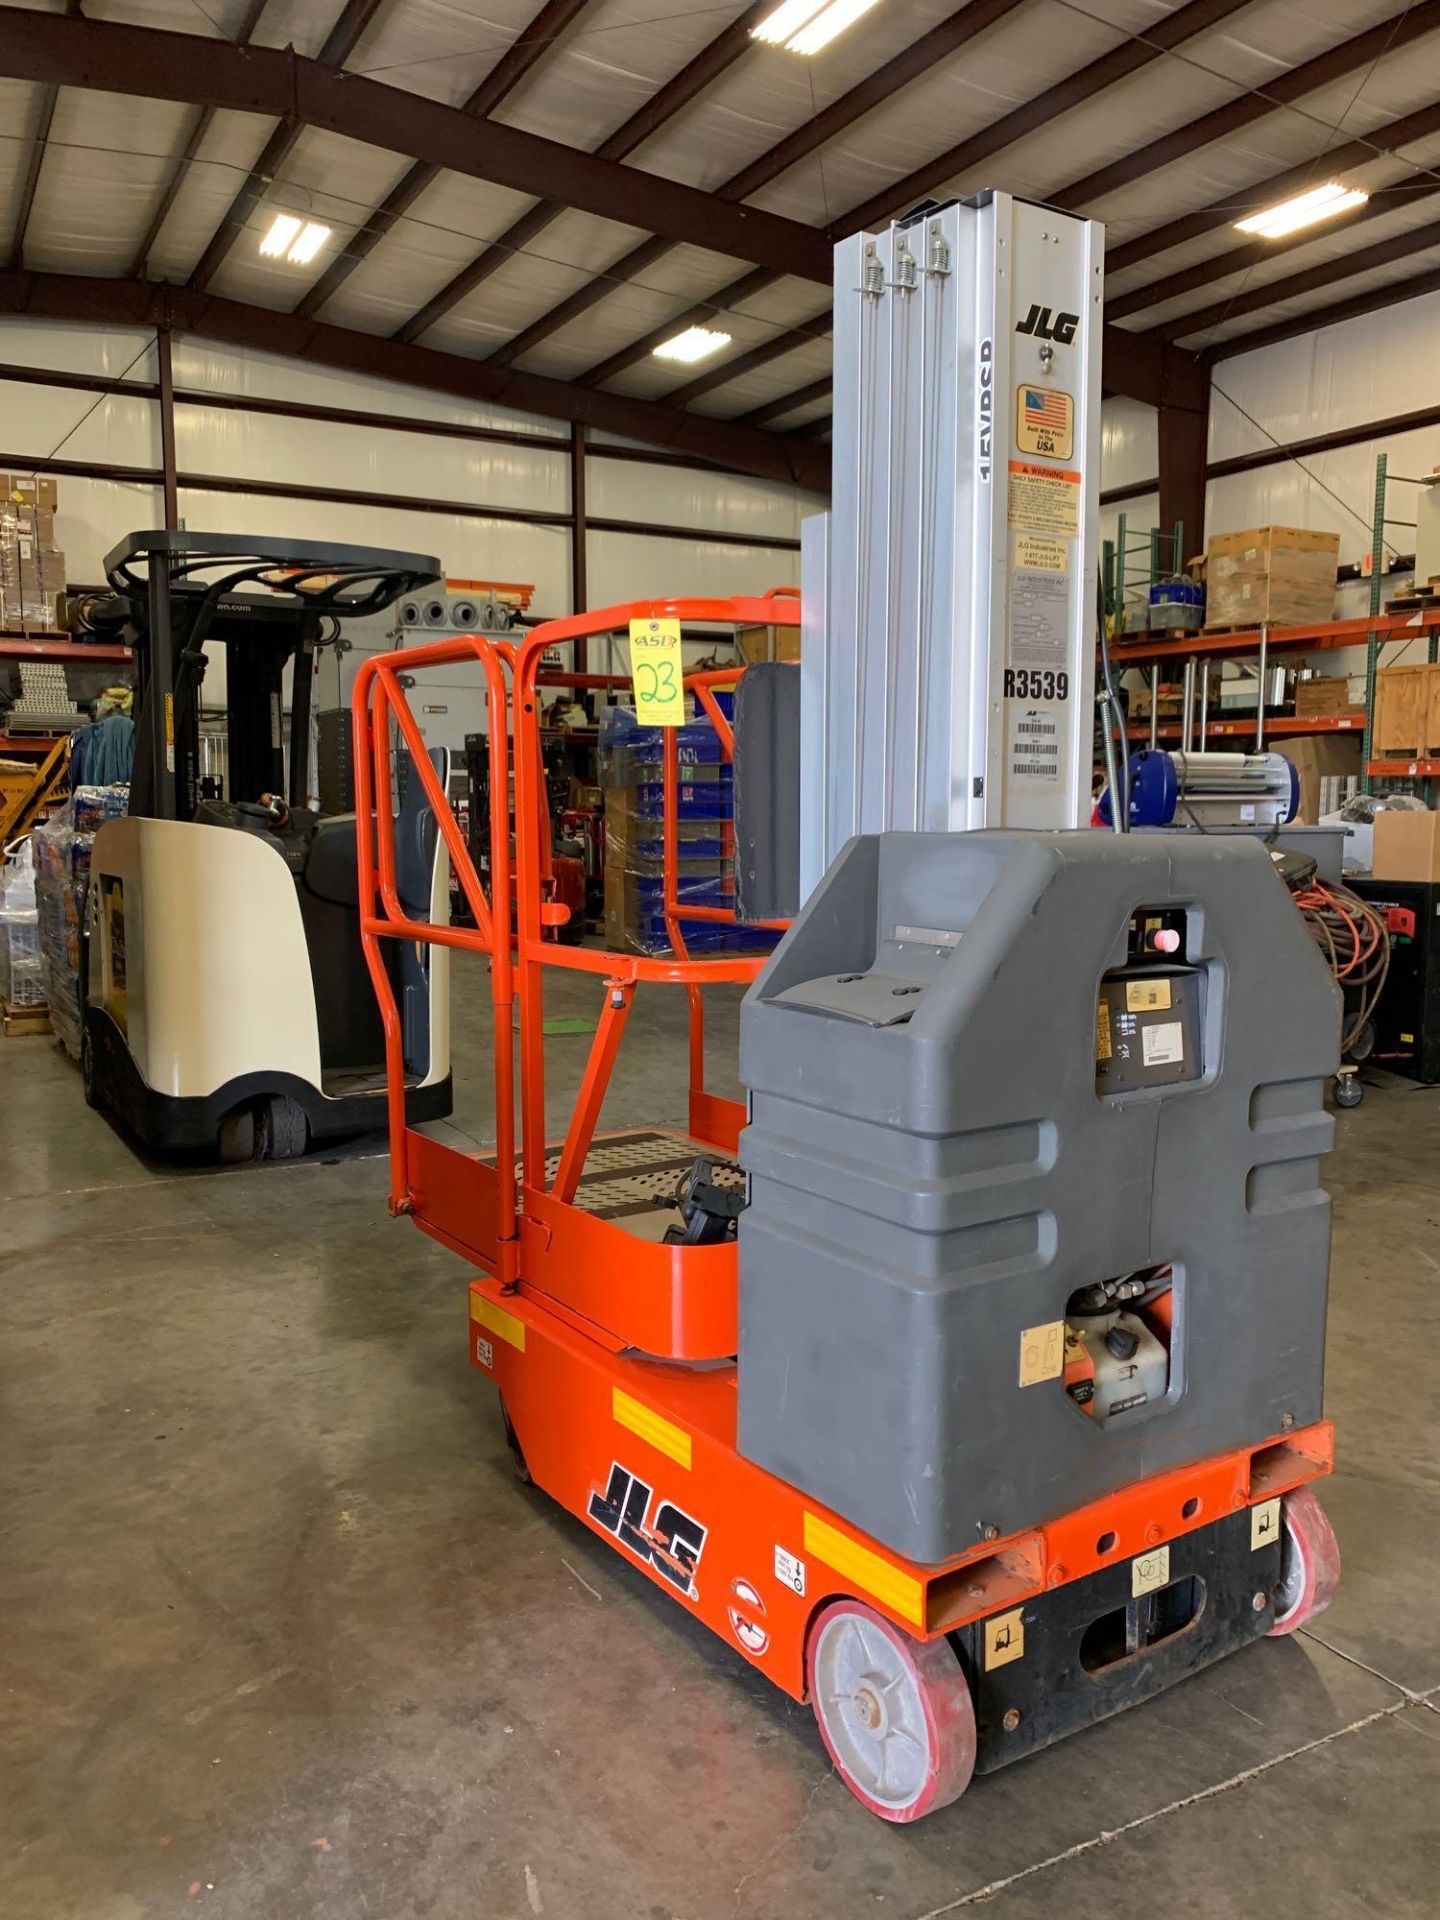 JLG 15VP SP ELECTRIC MANLIFT, SELF PROPELLED, BUILT IN CHARGER, 15’ PLATFORM HEIGHT, RUNS AND OPERAT